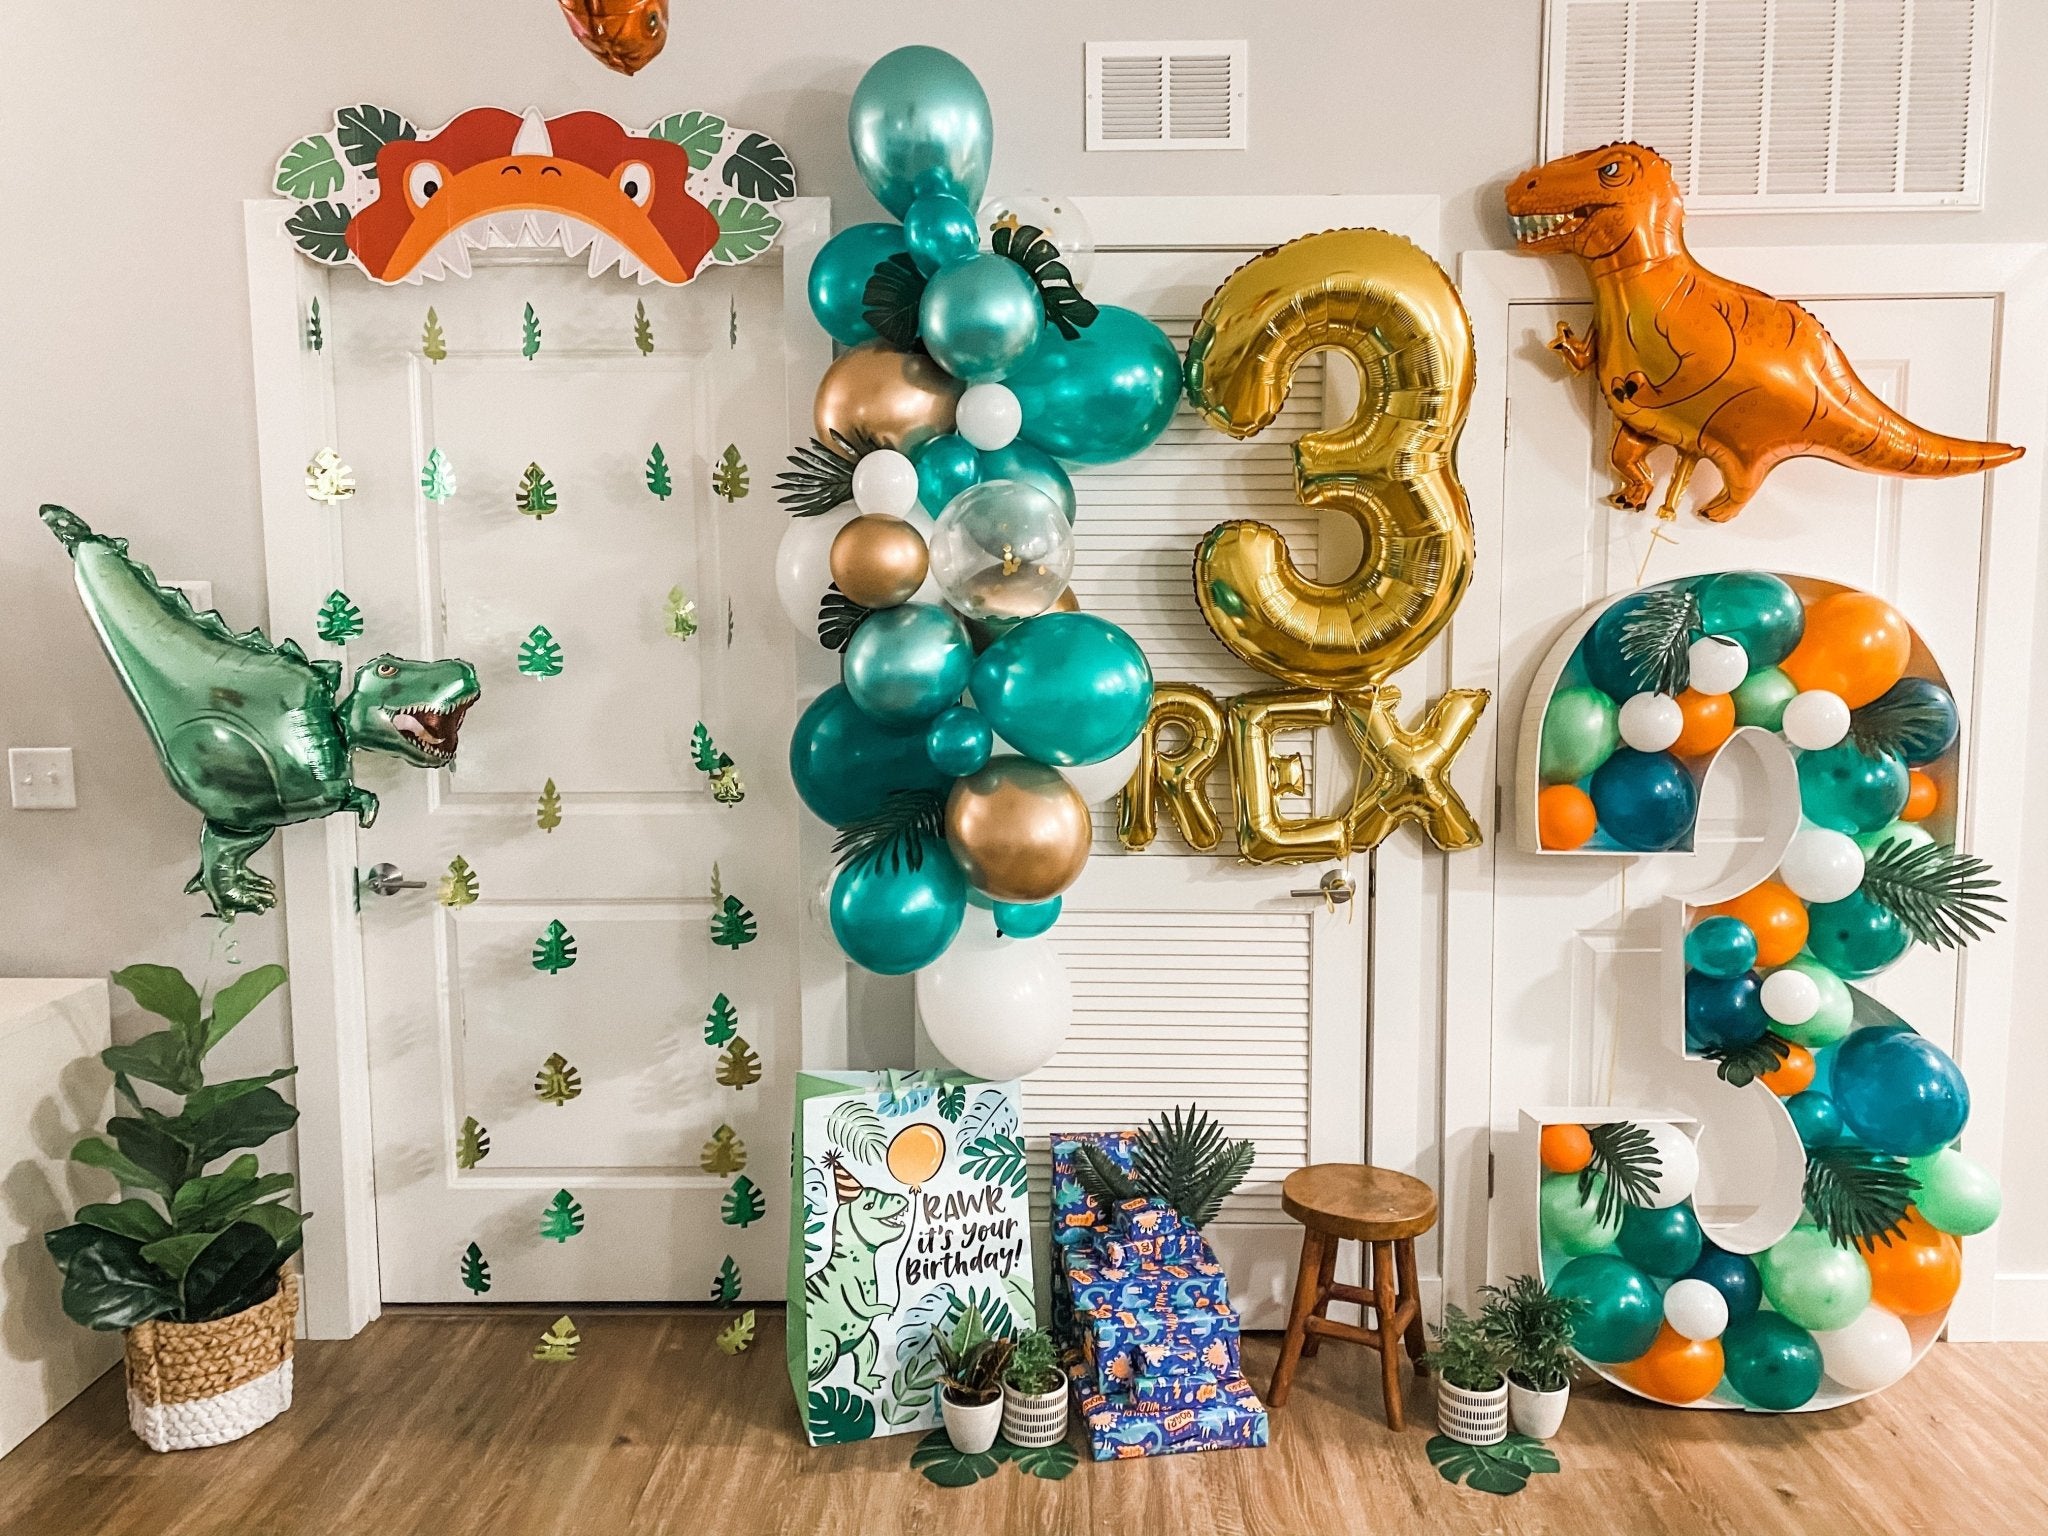 Top 5 Third Birthday Party Themes – Ellie's Party Supply